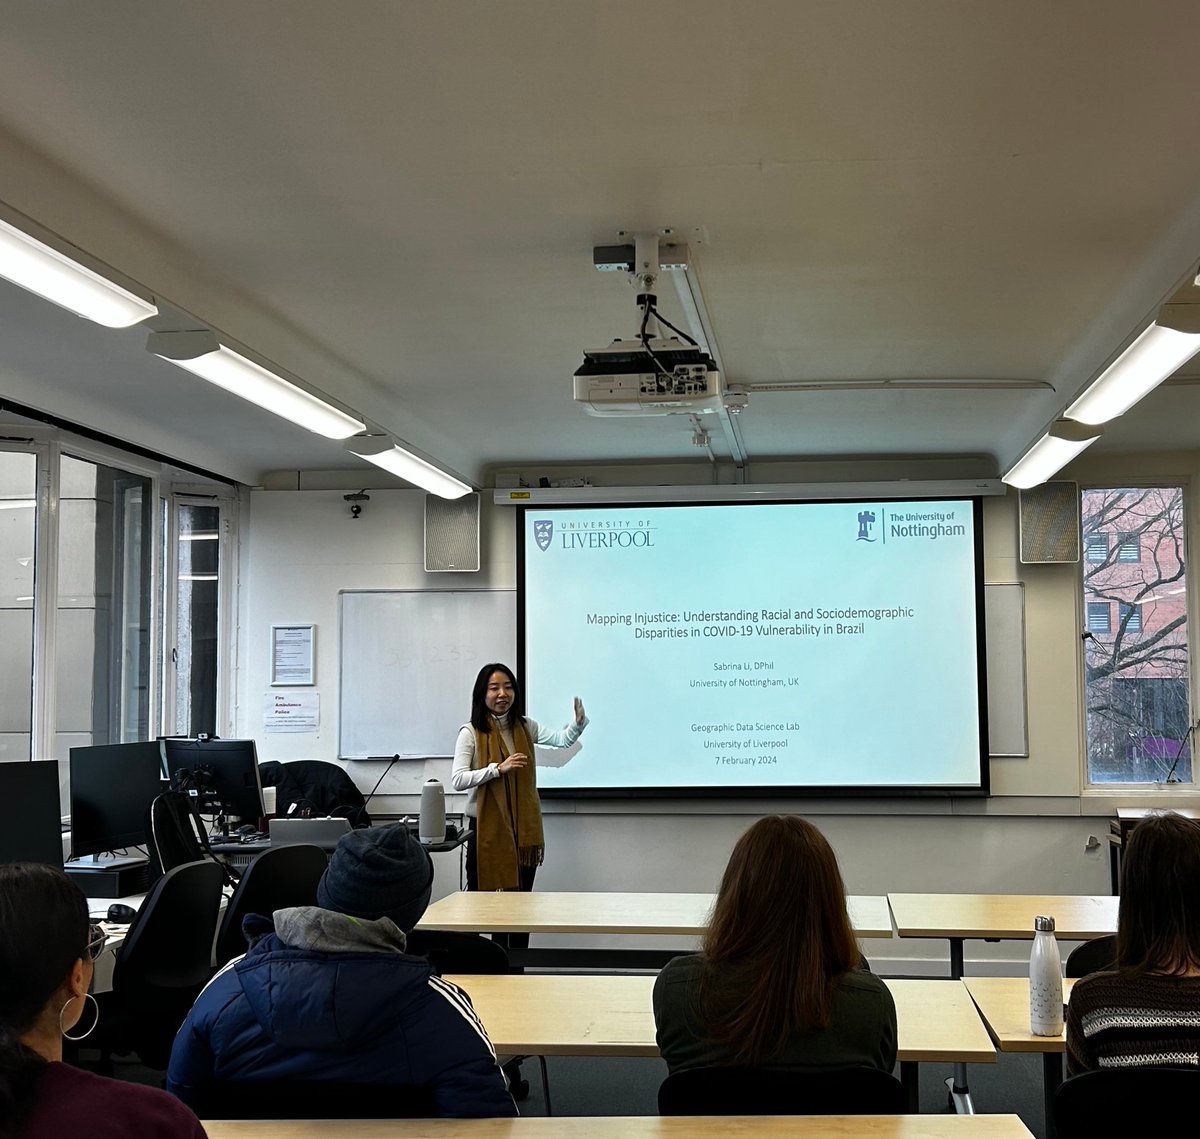 Great talk at yesterday's GDSL Brown Bag - thanks to @sabrinalyli for a fascinating presentation on disparities in Covid-19 vulnerability in Brazil 🇧🇷